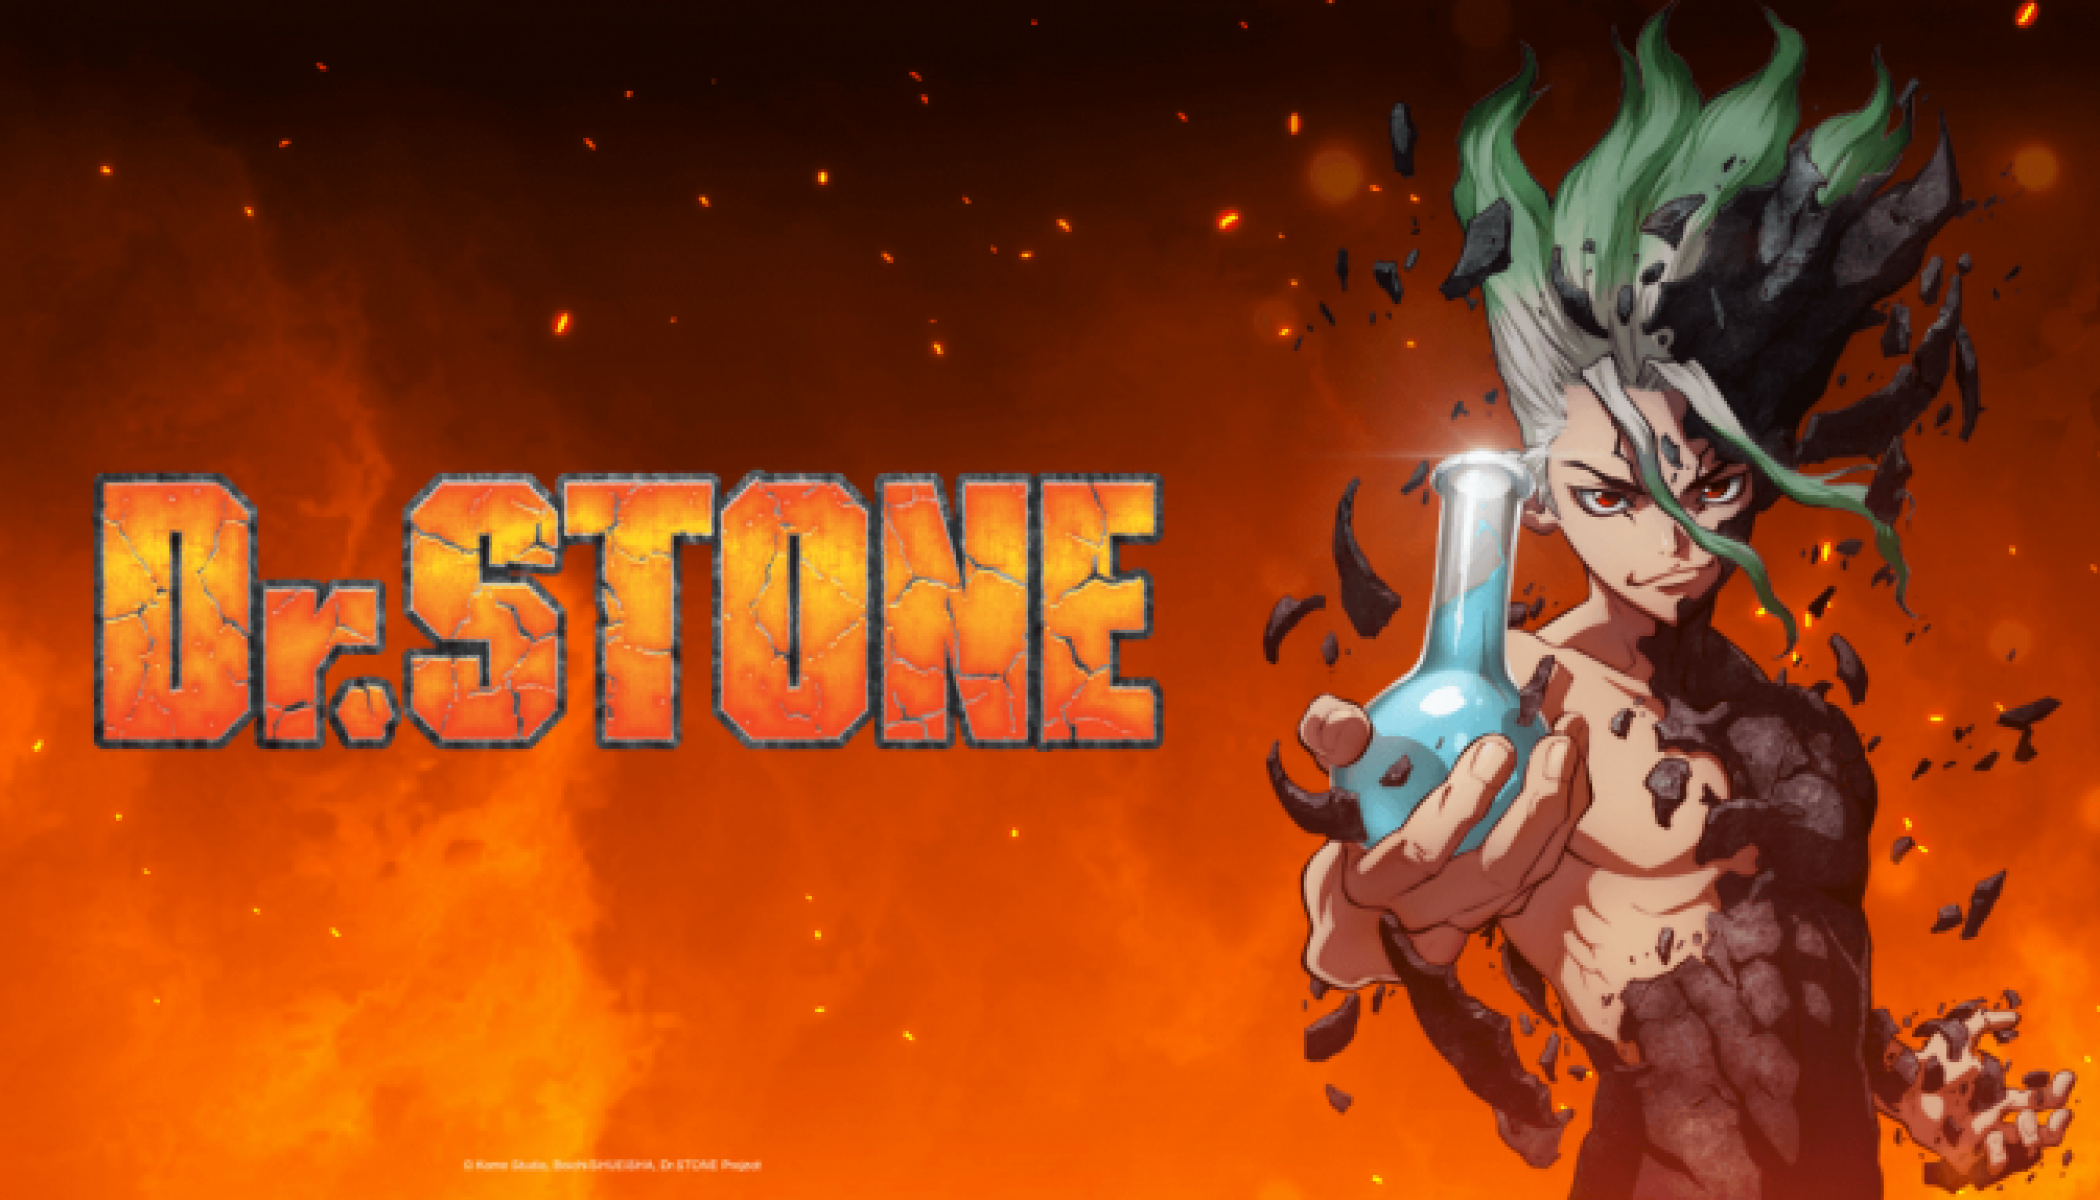 Download Dr Stone Merchandise Crunchyroll Png Anime Lovers